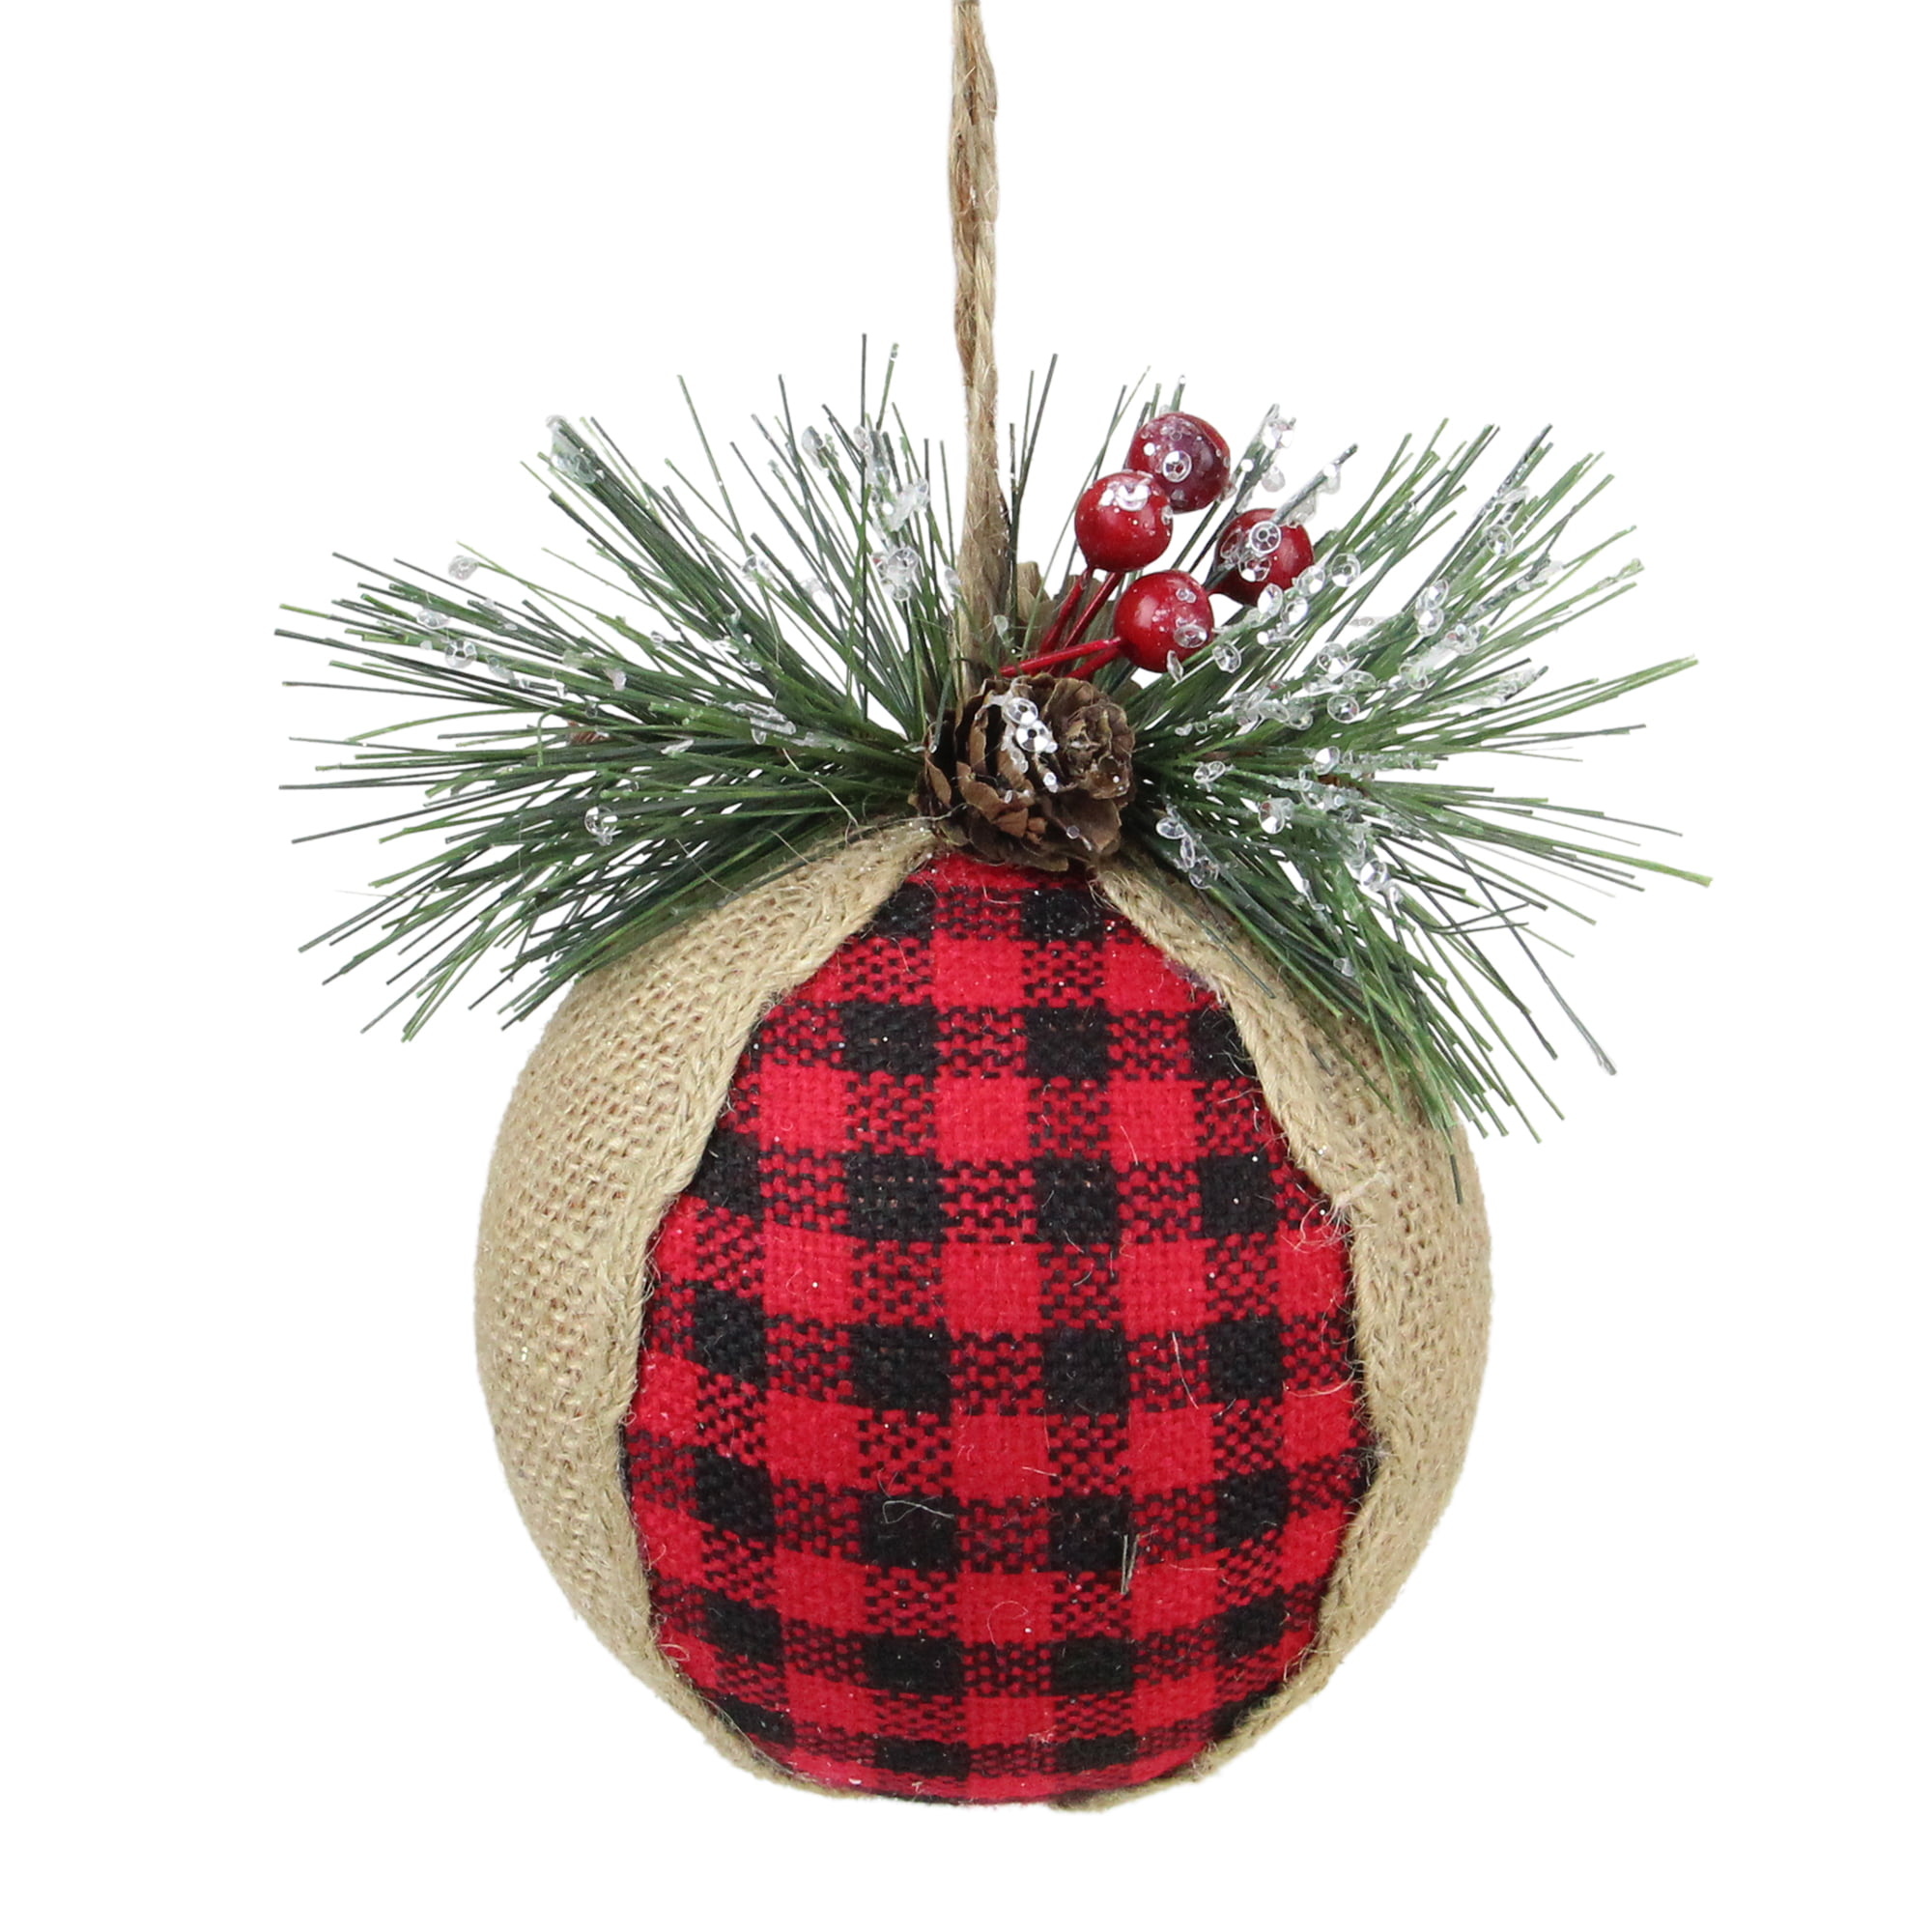 Rustic Plaid And Buffalo Check Star Ornaments Set Of 3 Holly berry Pine cone 